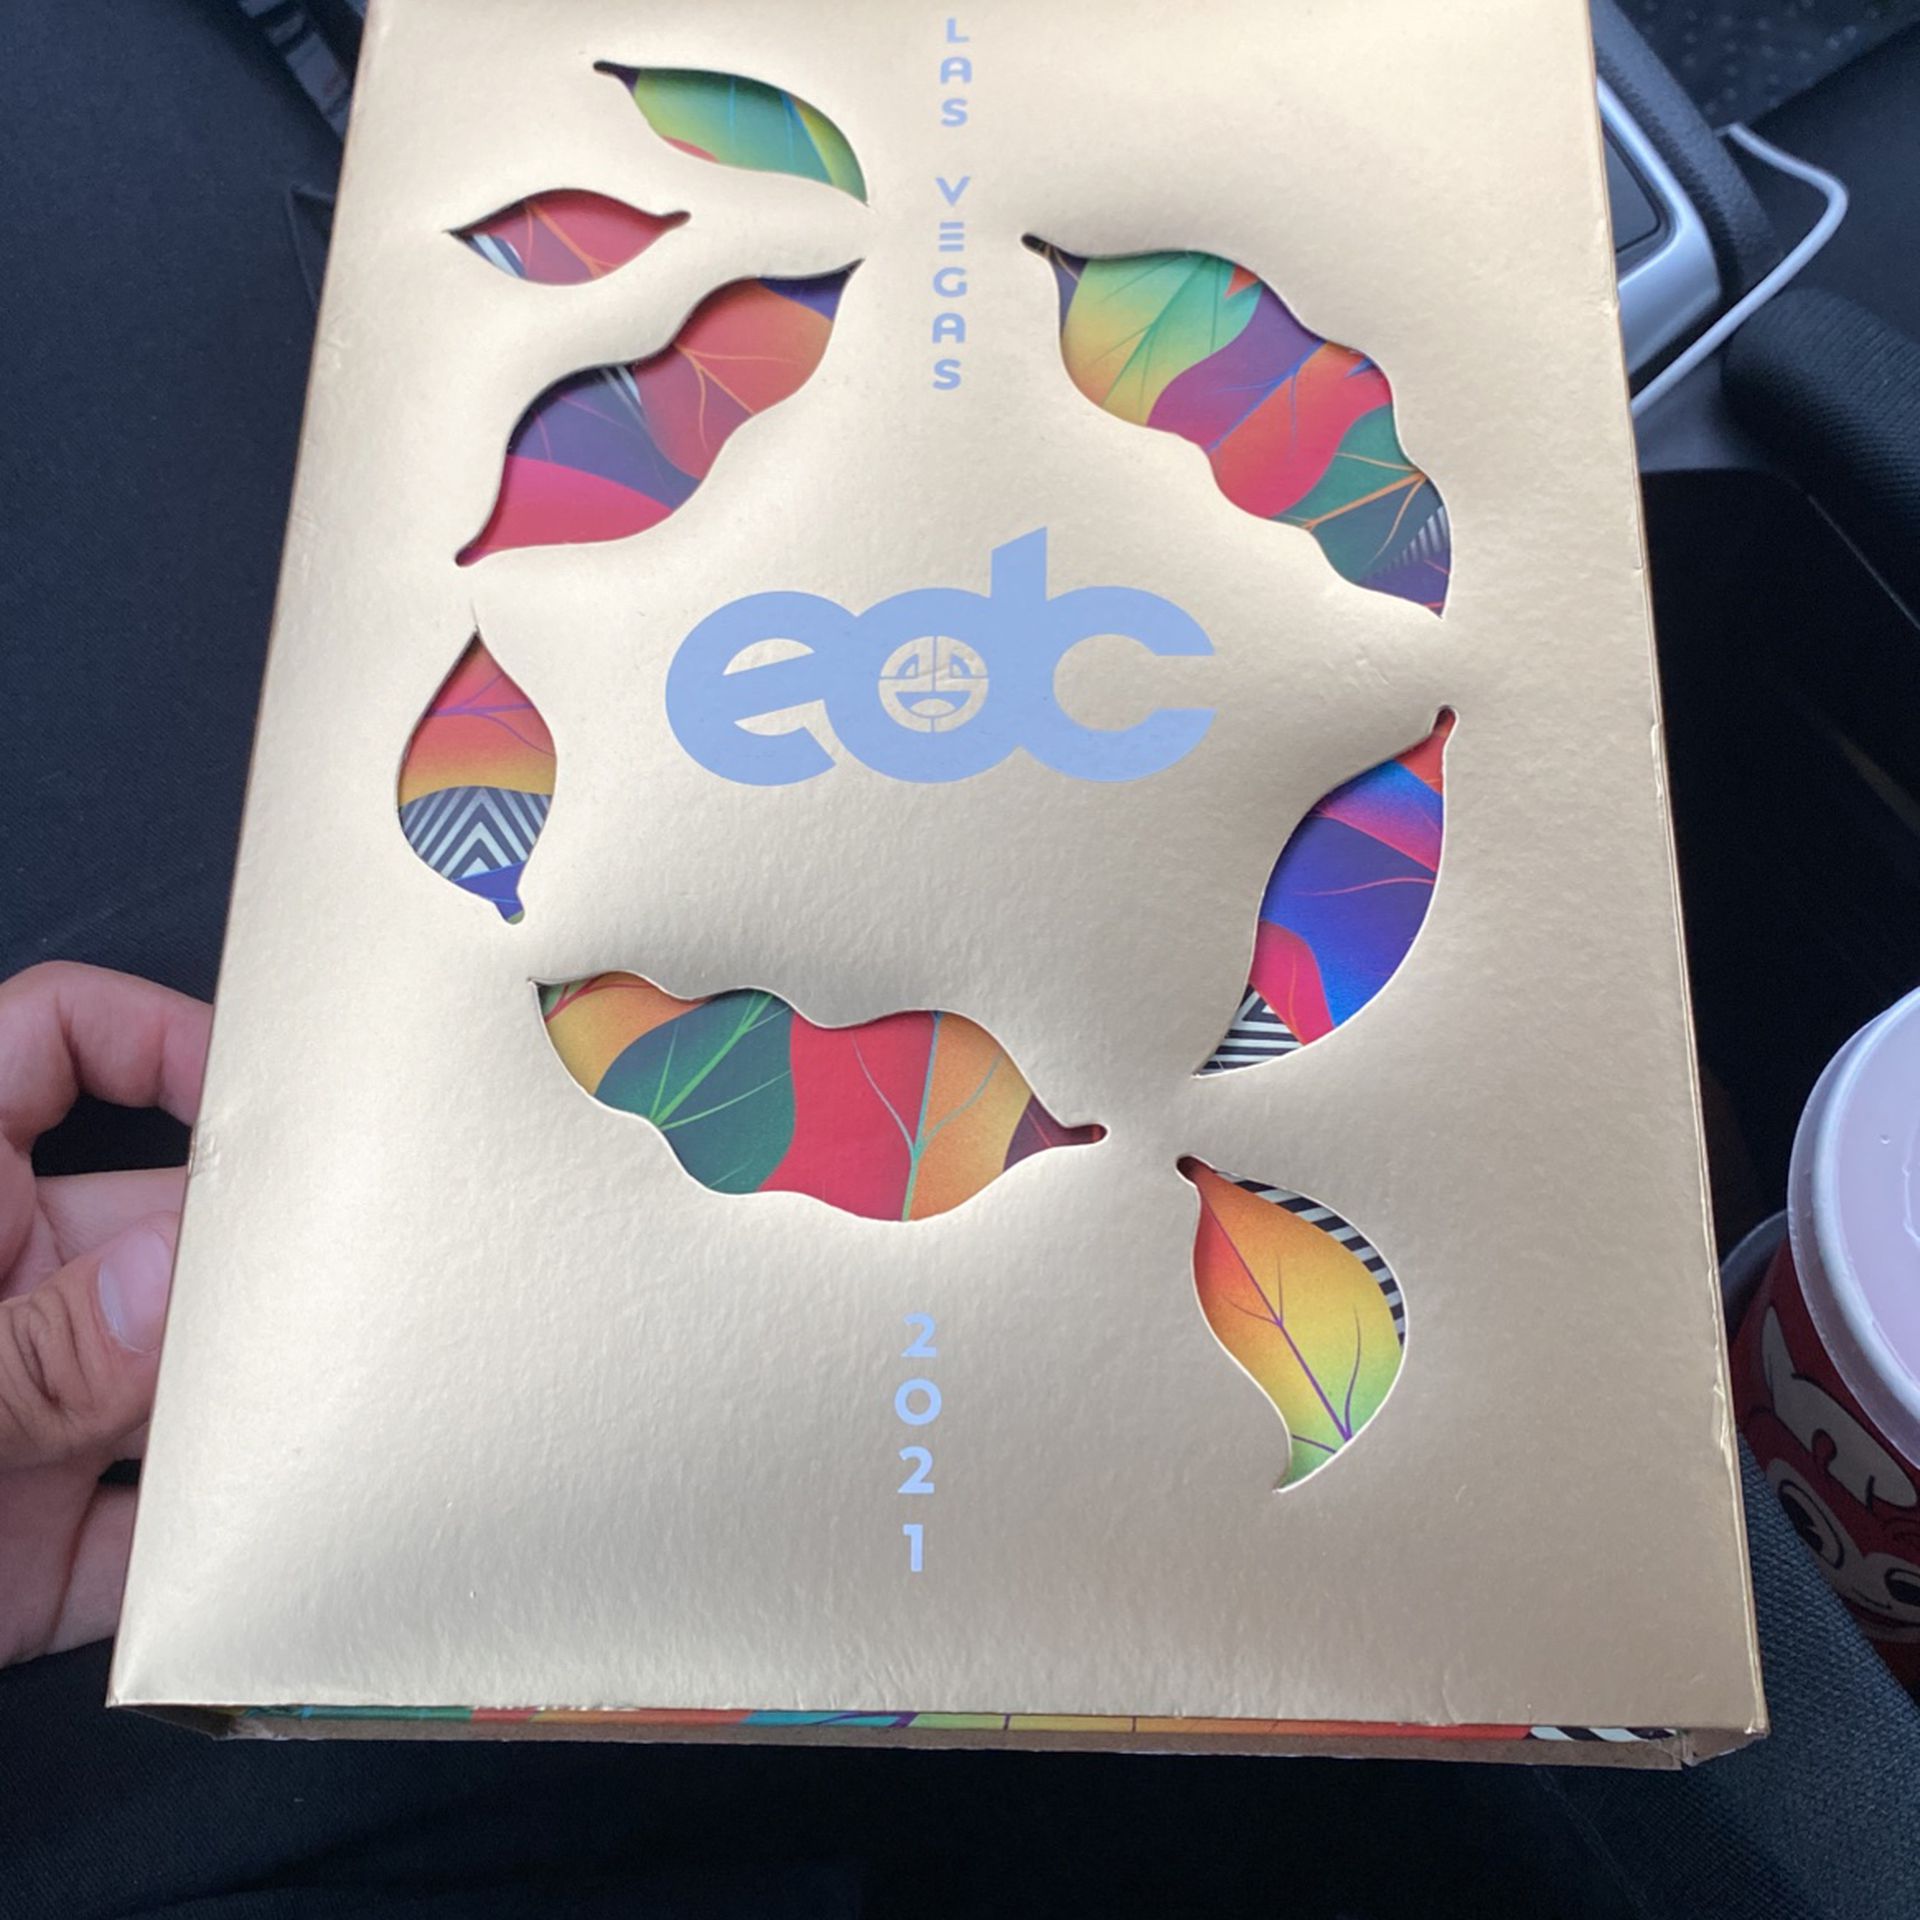 💜EDC 3 DAY GA EXPERIENCE PASS WRISTBAND 💜 (with funny story!)